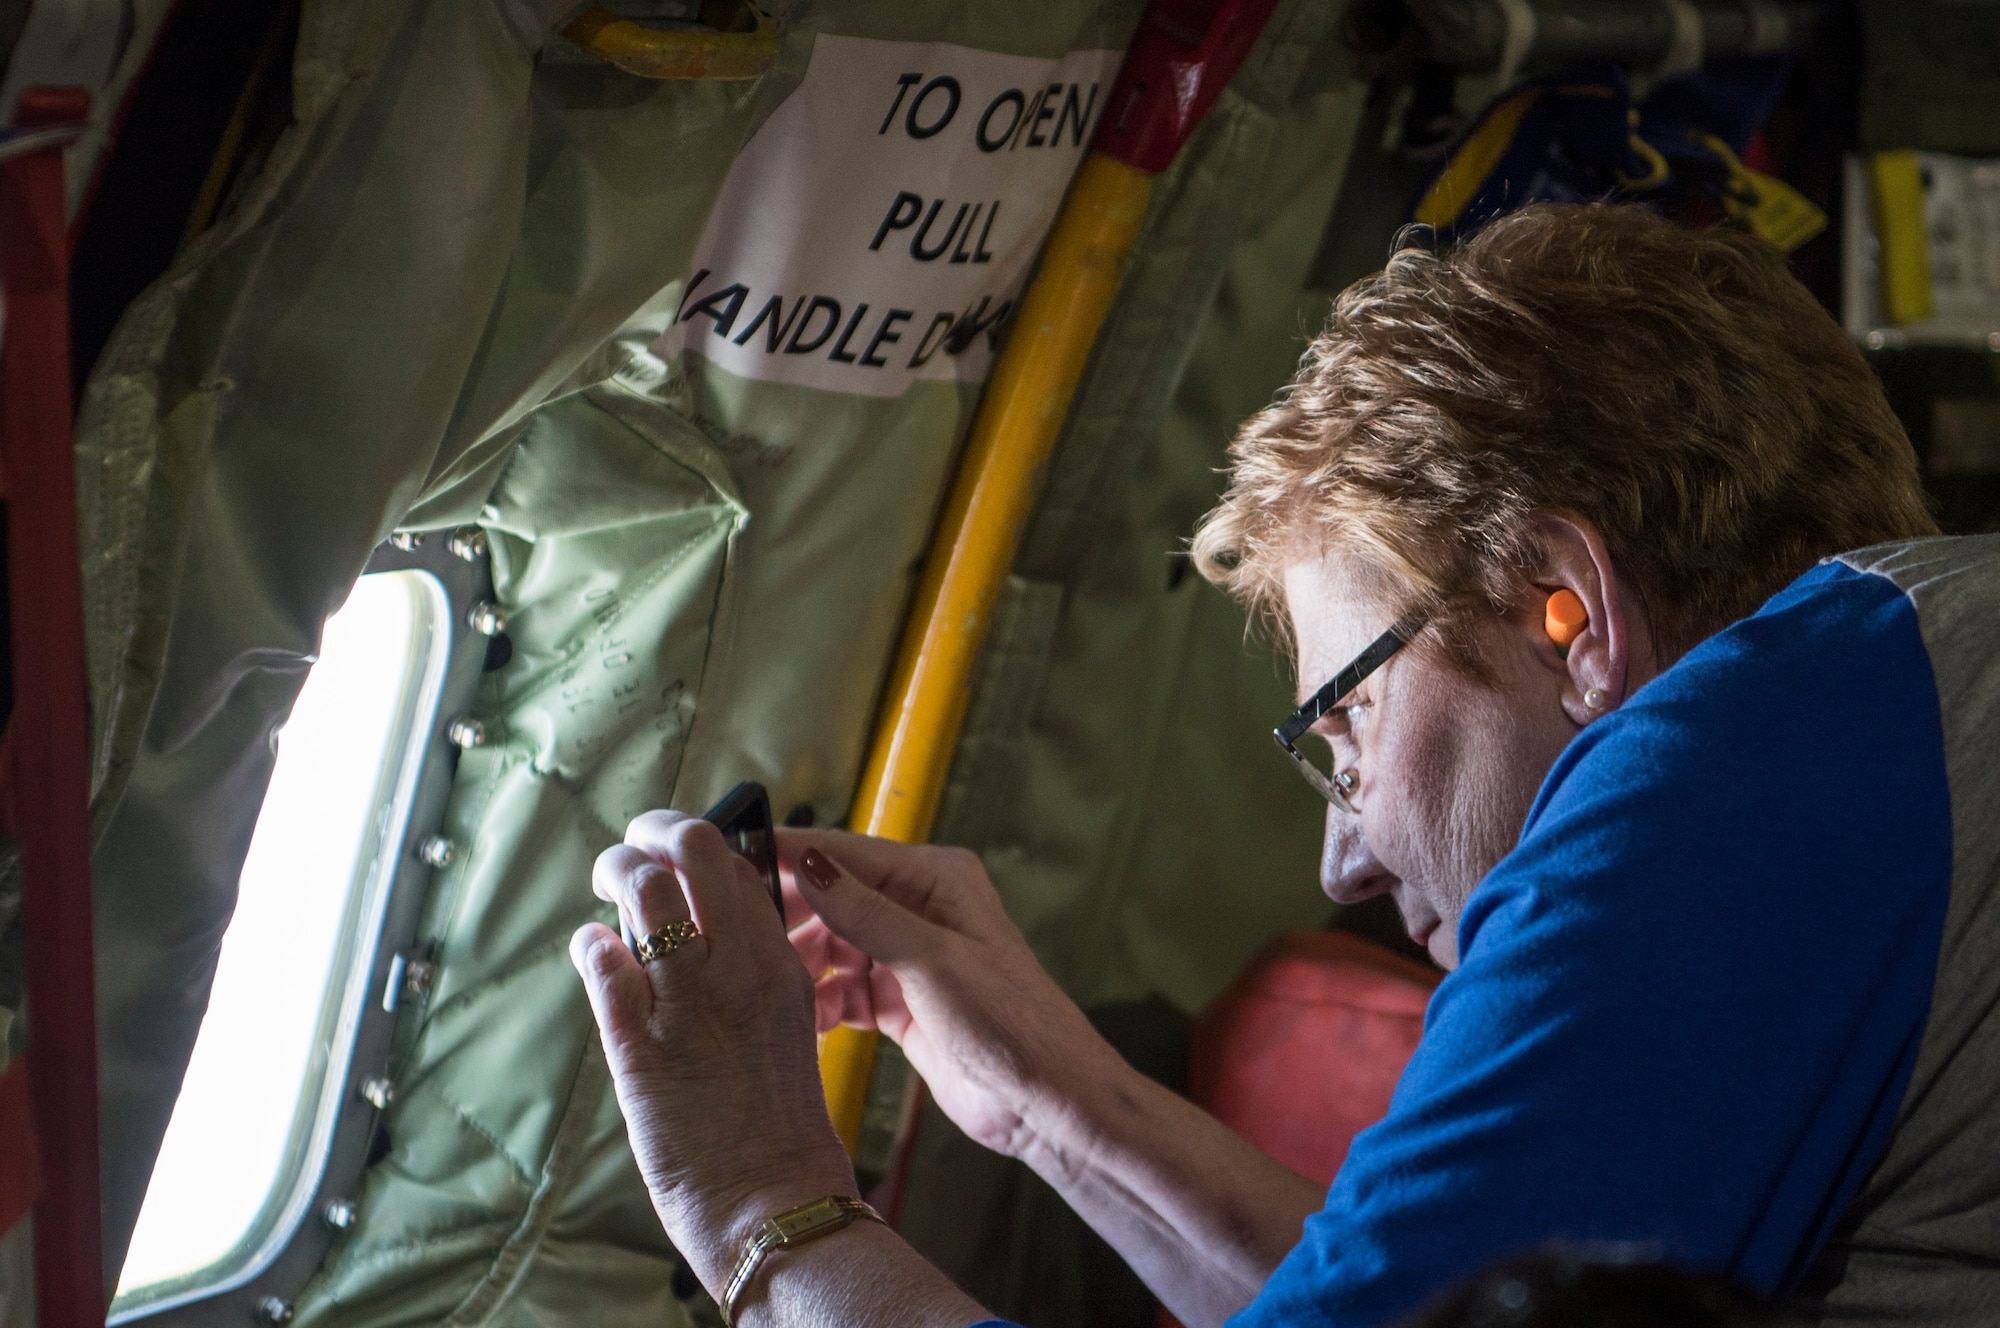 The 126th Air Refueling Wing, 906th Air Refueling Squadron and the 375th Air Mobility Wing hosted a KC-135 Stratotanker orientation flight with Scott Air Force Base’s honorary commanders May 22, 2018, at Scott AFB, Illinois. They were able to witness an aerial refueling and a tour of the St. Louis Arch by a total force crew. “[It was] great to demonstrate our capabilities to those from the local community who partner with us and support our families,” said Lt. Col. Christopher Schlachter Sr., 906th ARS commander. (U.S. Air Force photo by Senior Airman Melissa Estevez)